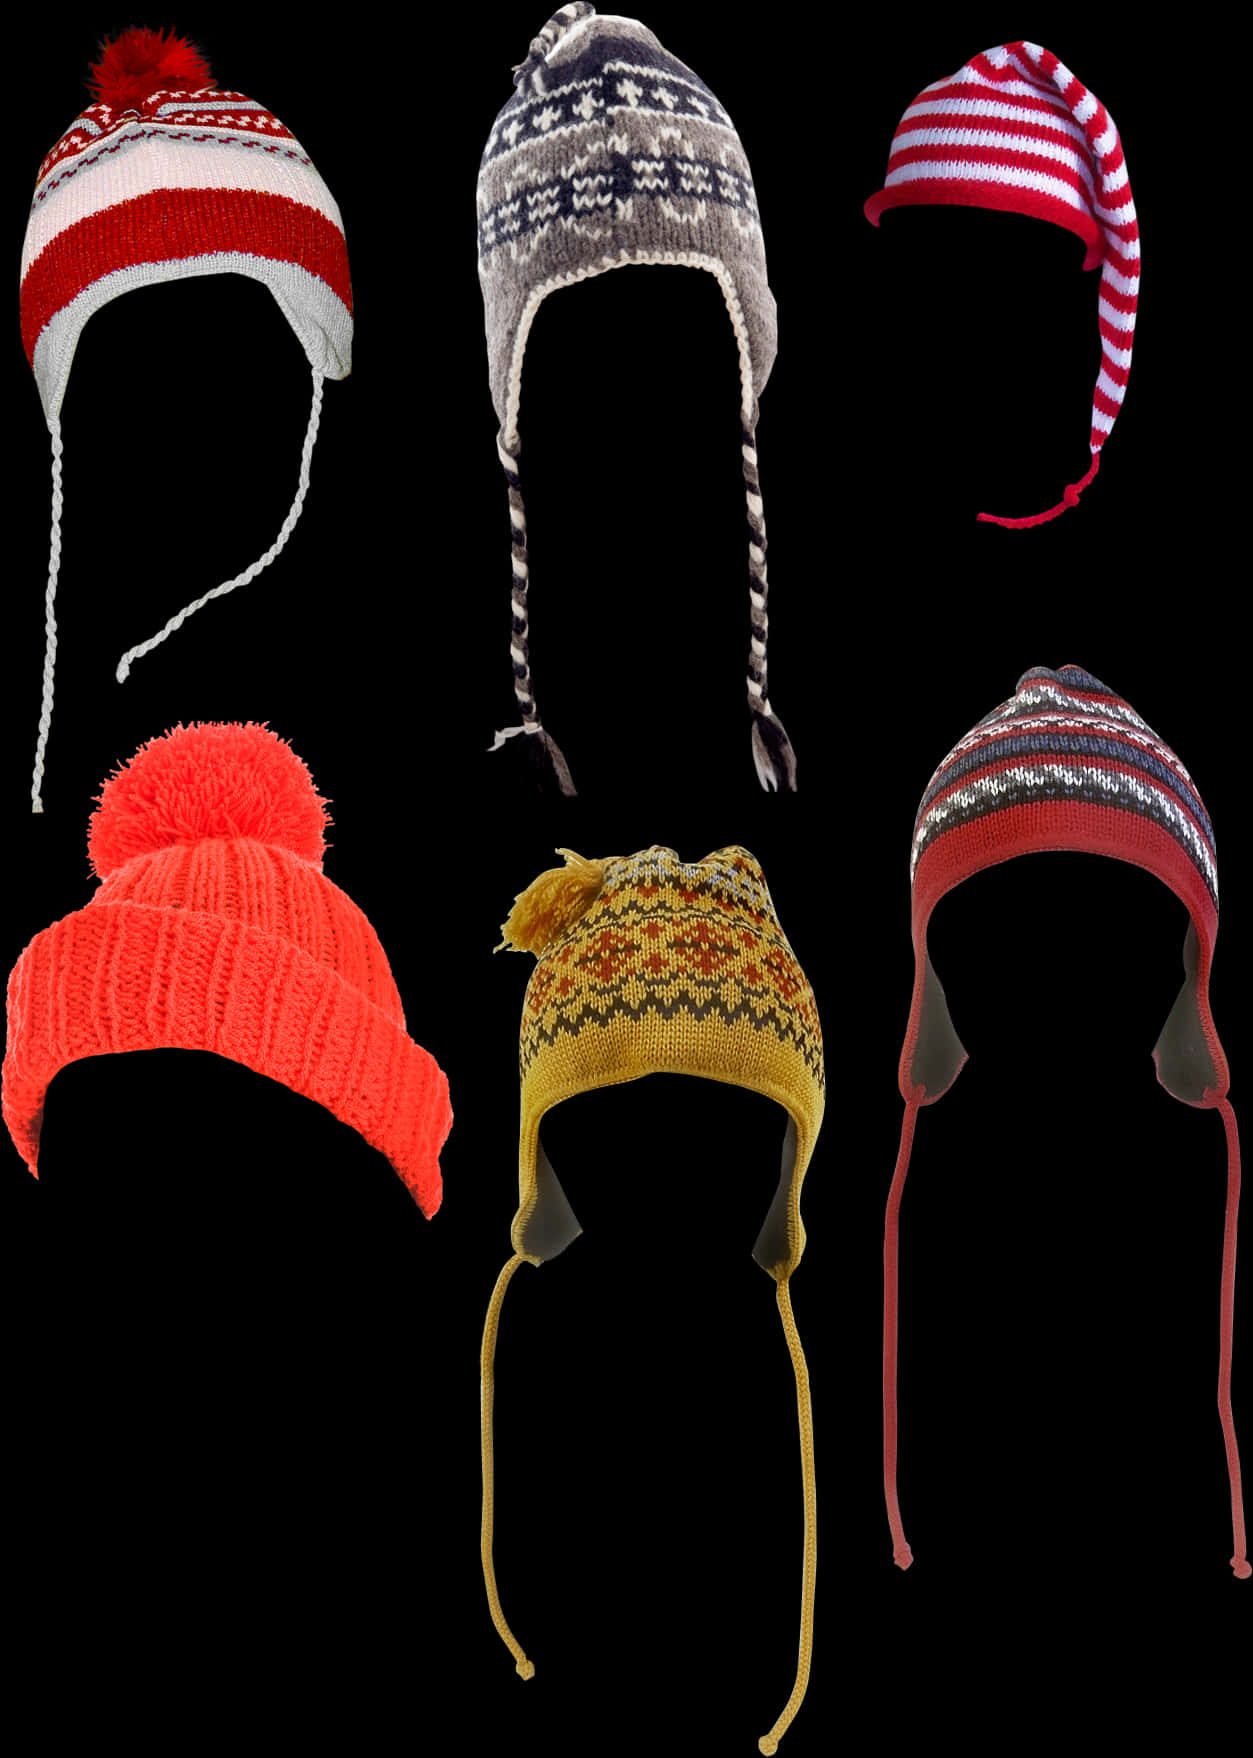 A Group Of Different Hats